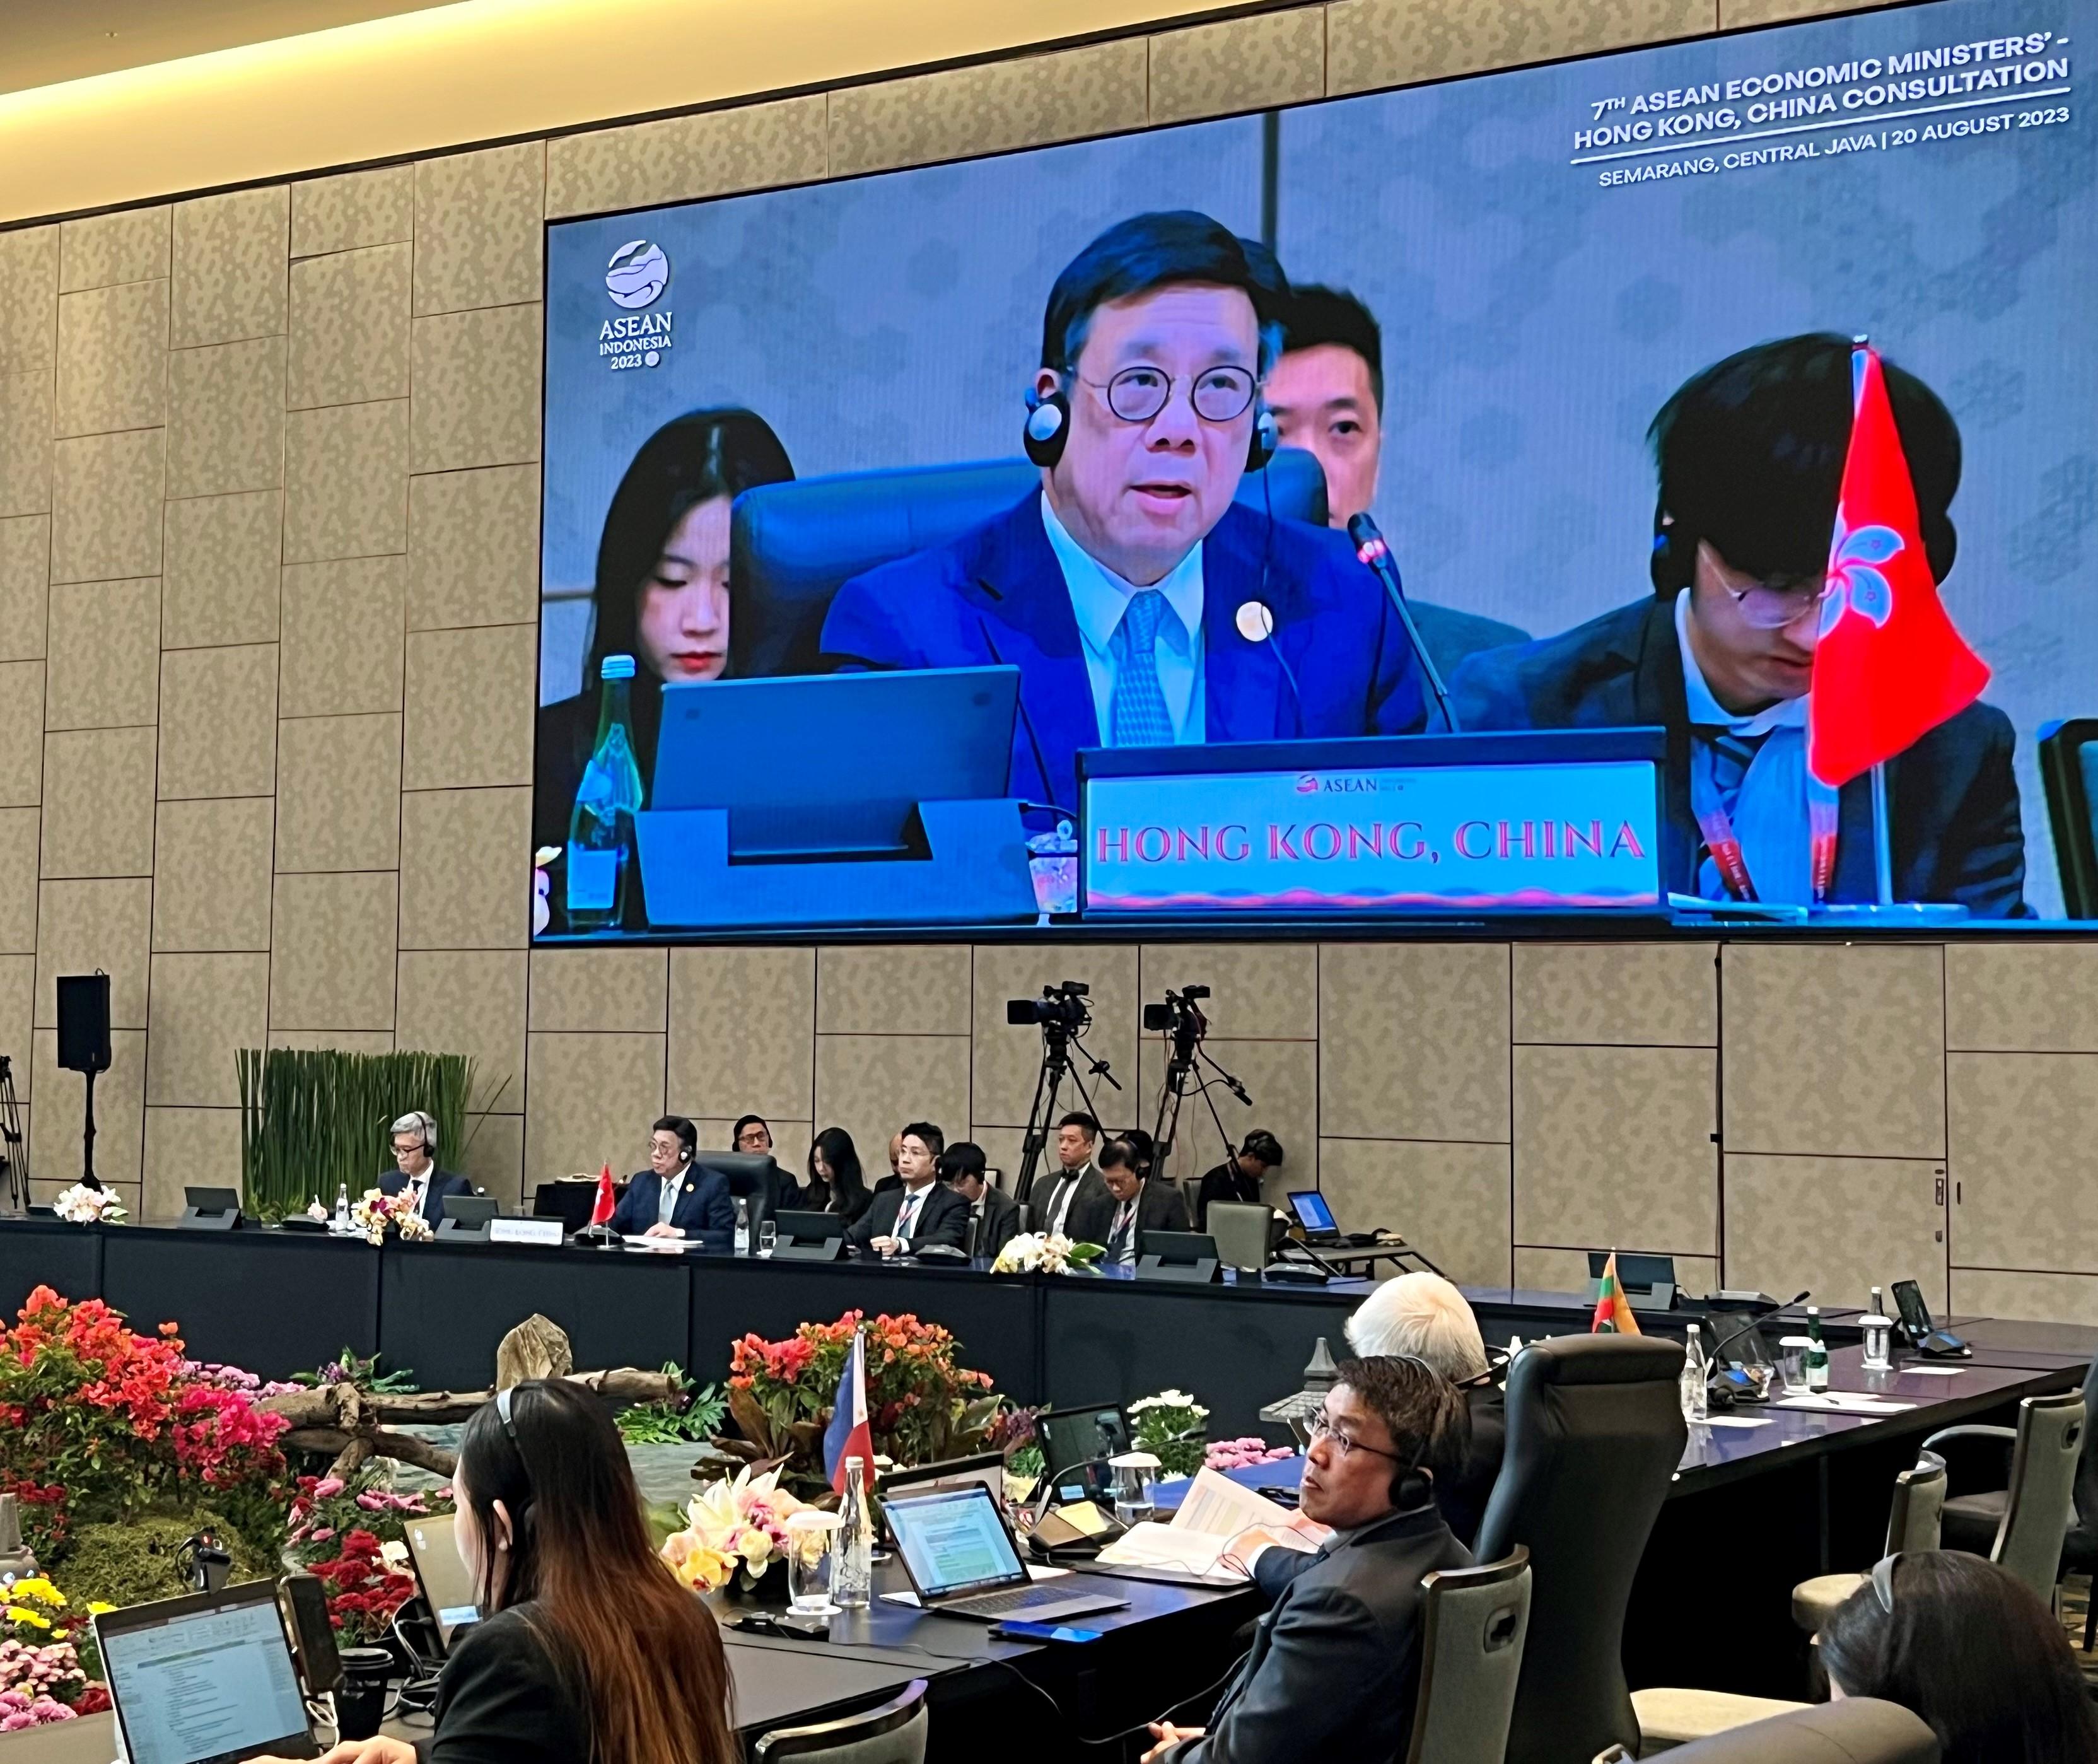 The Secretary for Commerce and Economic Development, Mr Algernon Yau, speaks at the seventh Association of Southeast Asian Nations Economic Ministers - Hong Kong, China Consultation in Semarang, Indonesia, today (August 20).